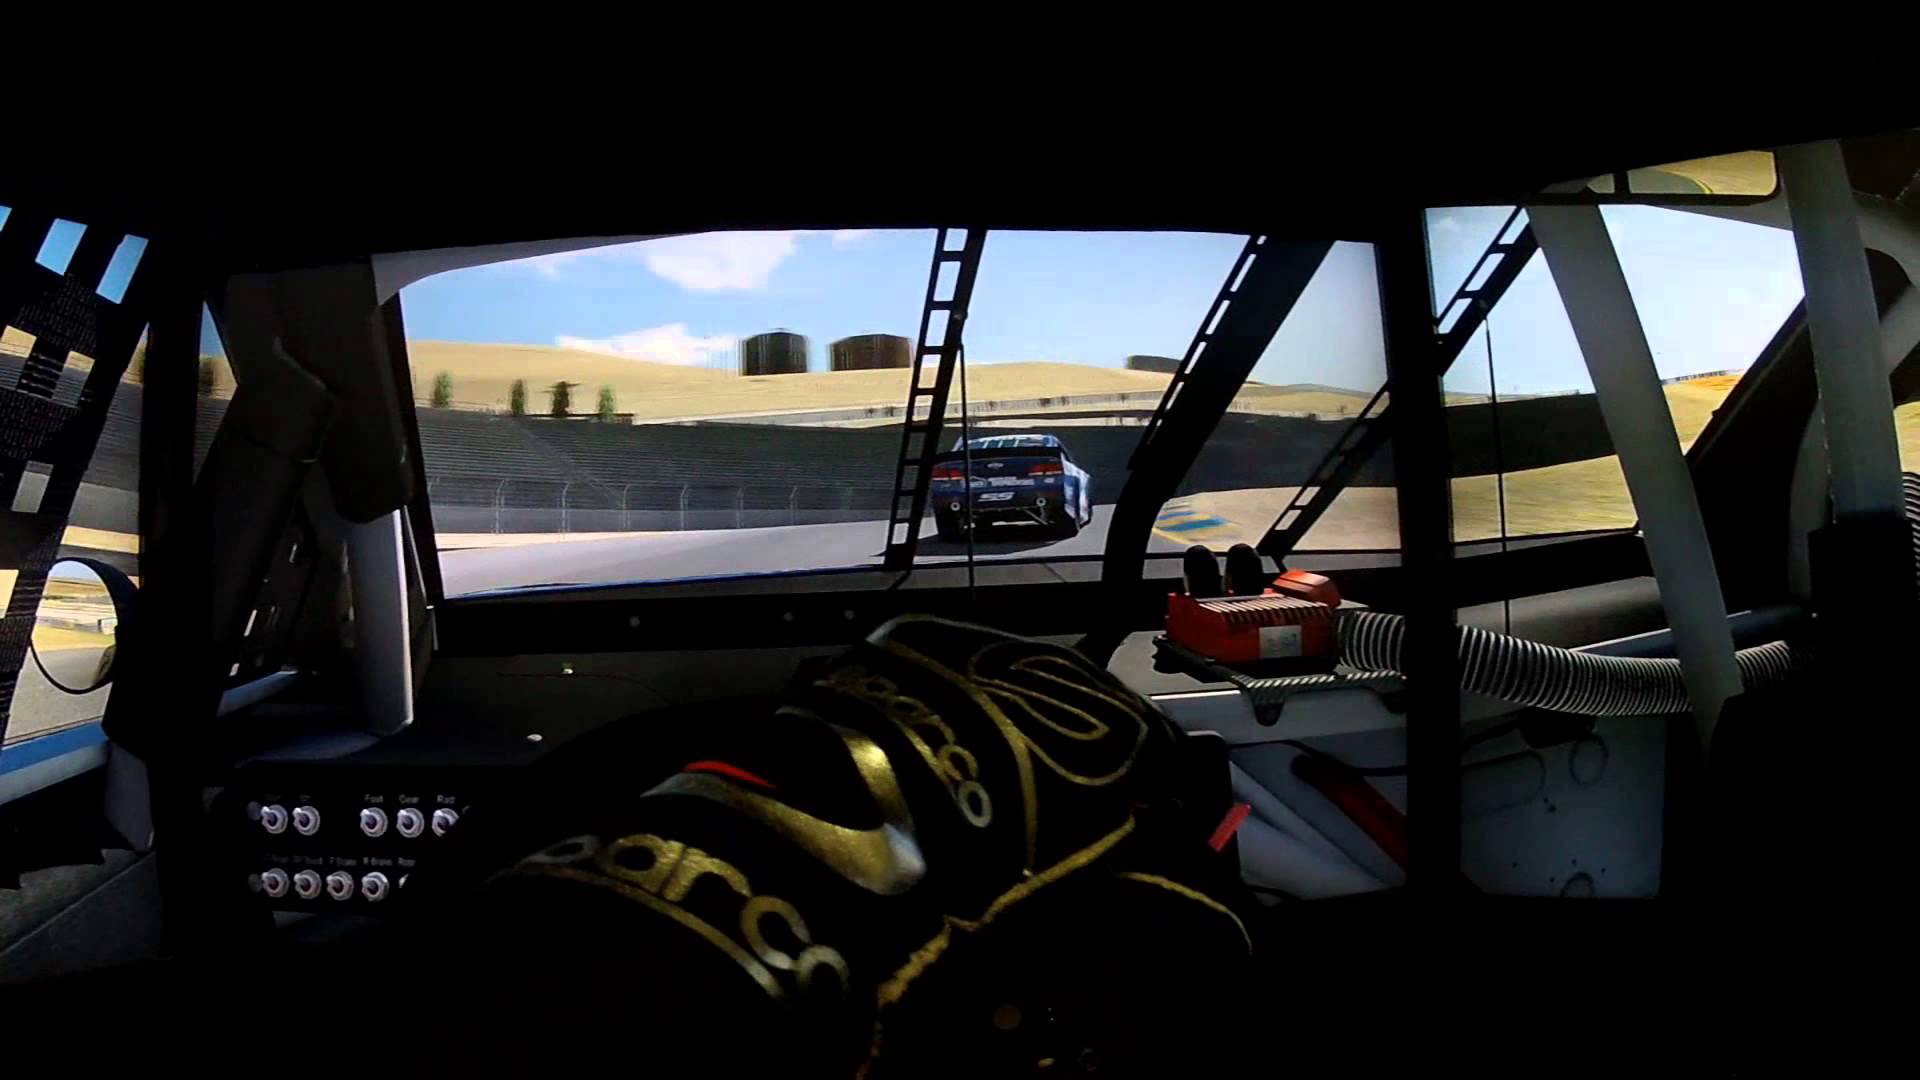 Iracing Nascar Gen Ford Fusion Vs Chevy Ss Sonoma Gopro Triple